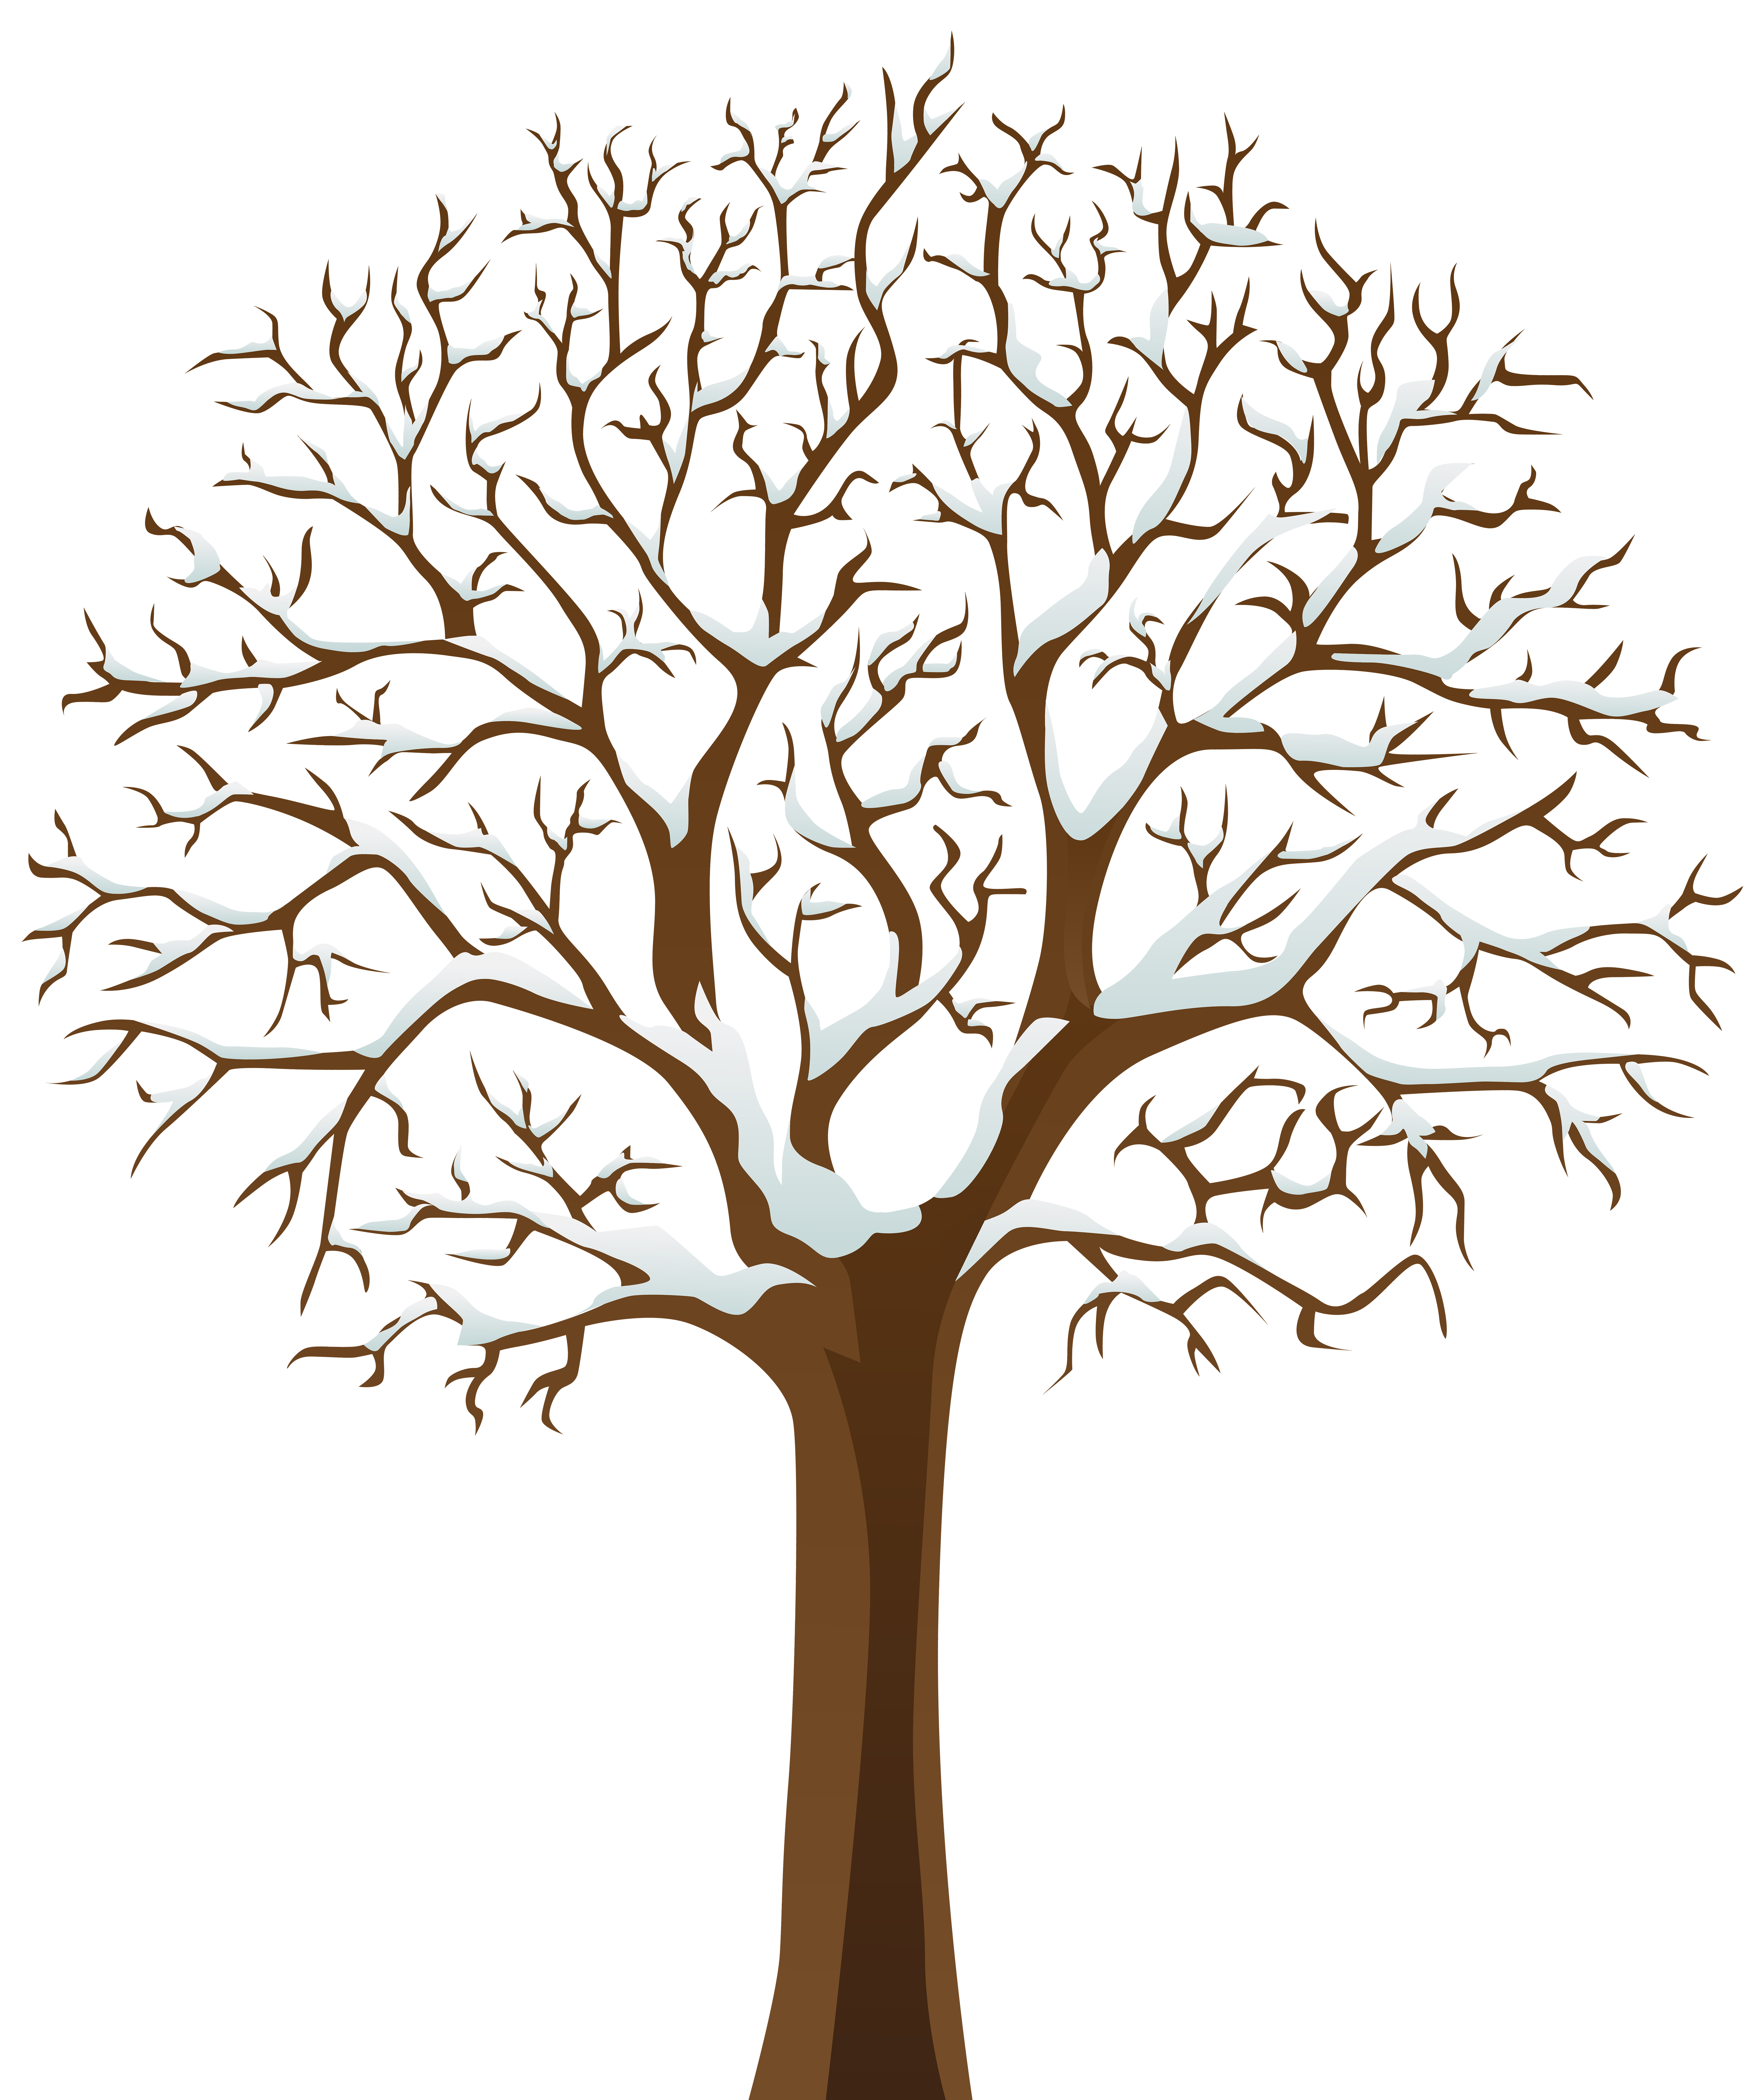 Trees silhouette at getdrawings. Clipart star winter